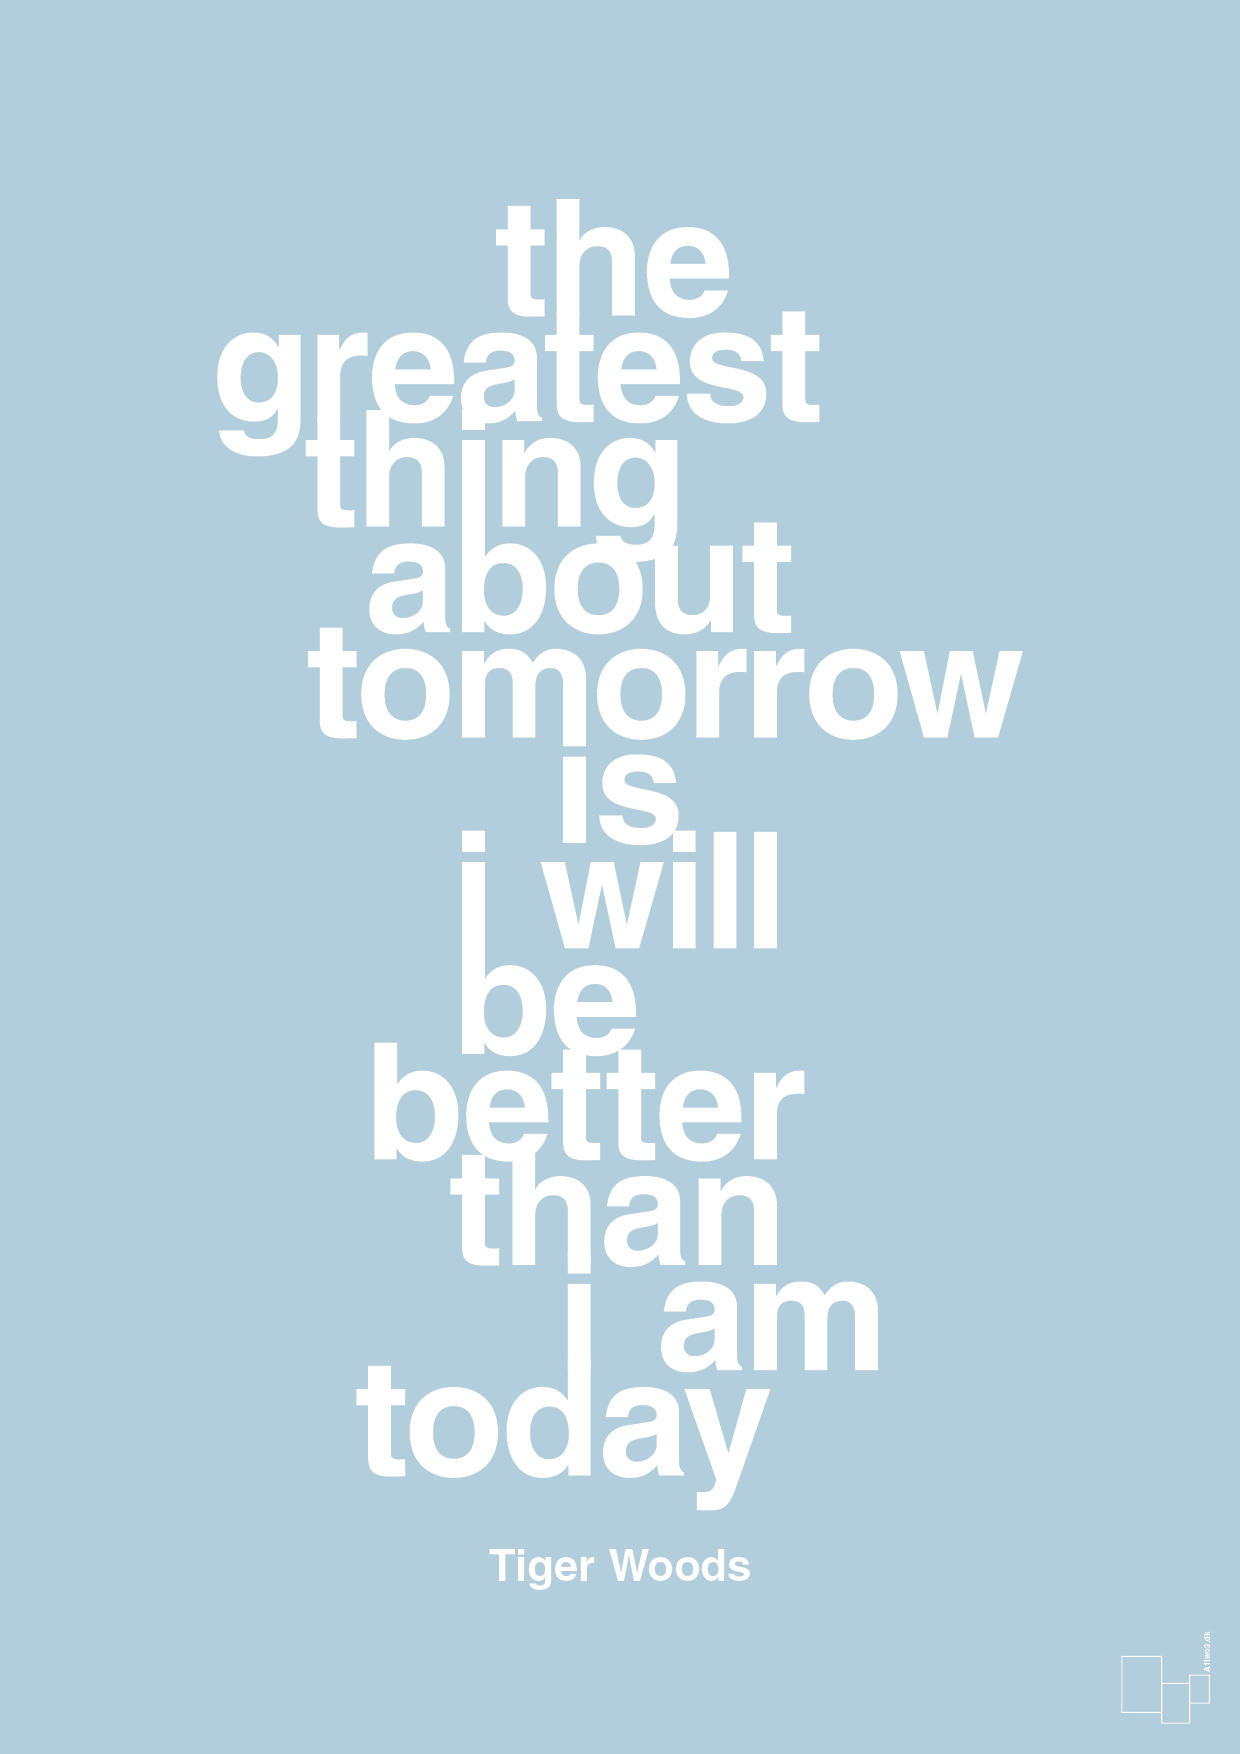 the greatest thing about tomorrow is i will be better than i am today - Plakat med Citater i Heavenly Blue